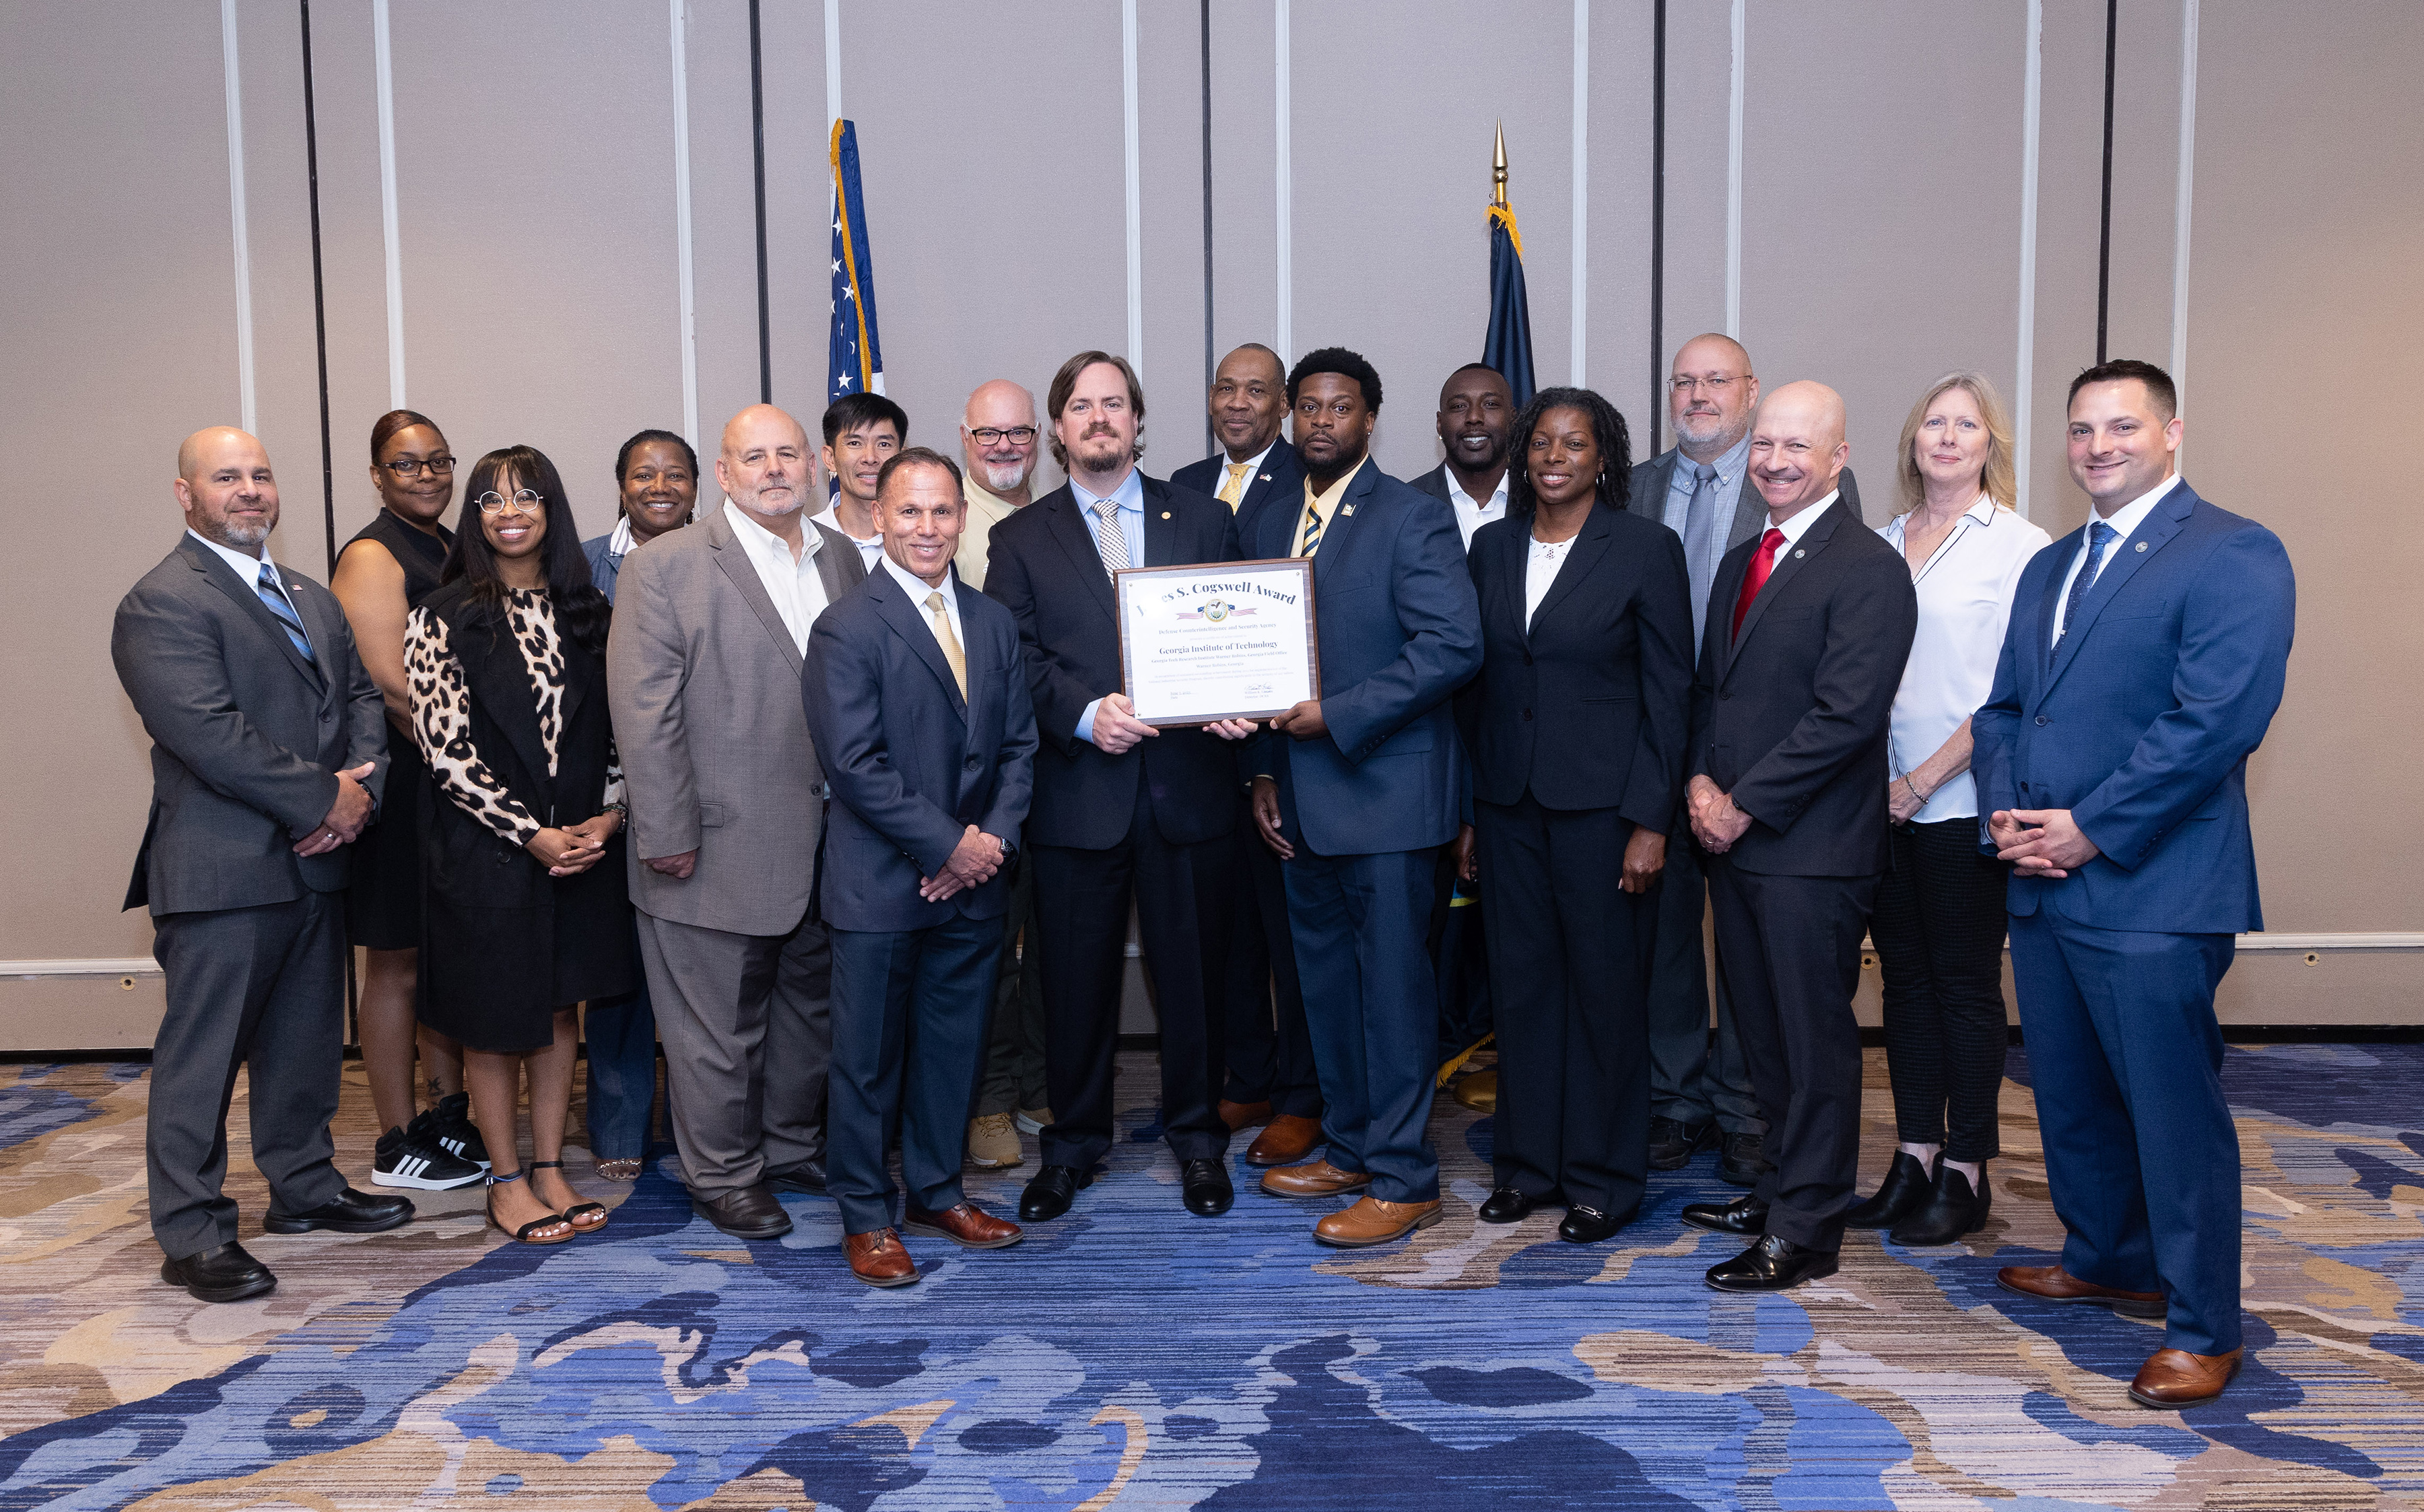 GTRI's Warner Robins Field Office is among the organizations recently receiving a Cogswell Award for industrial security. The award was presented at the annual NCMS training seminar. (Photo courtesy of DCSA)
